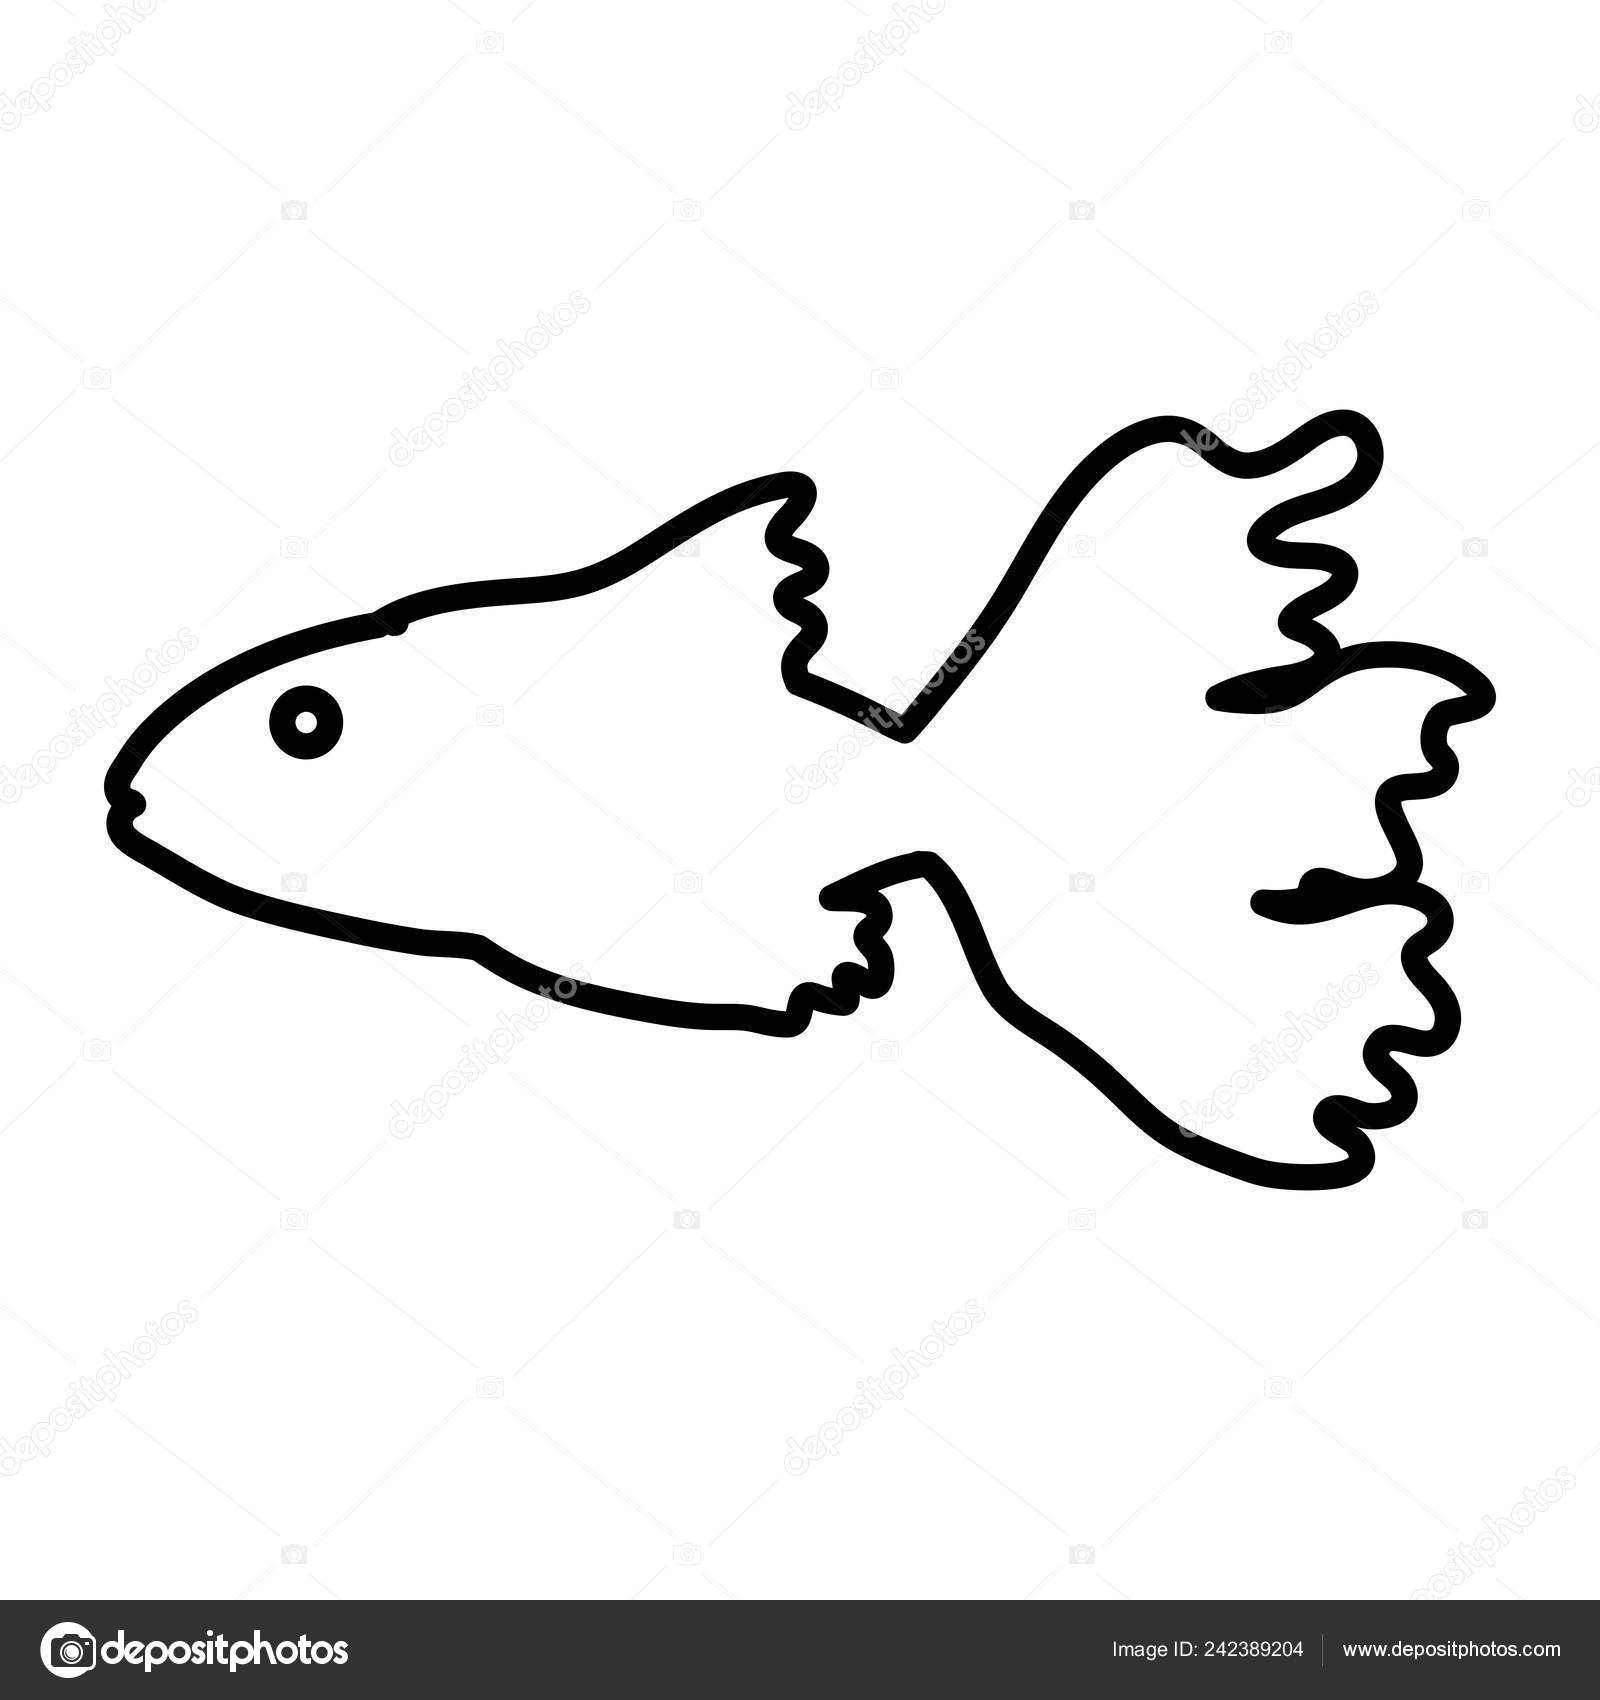 Tropical fish line icon nature and animal Vector Image